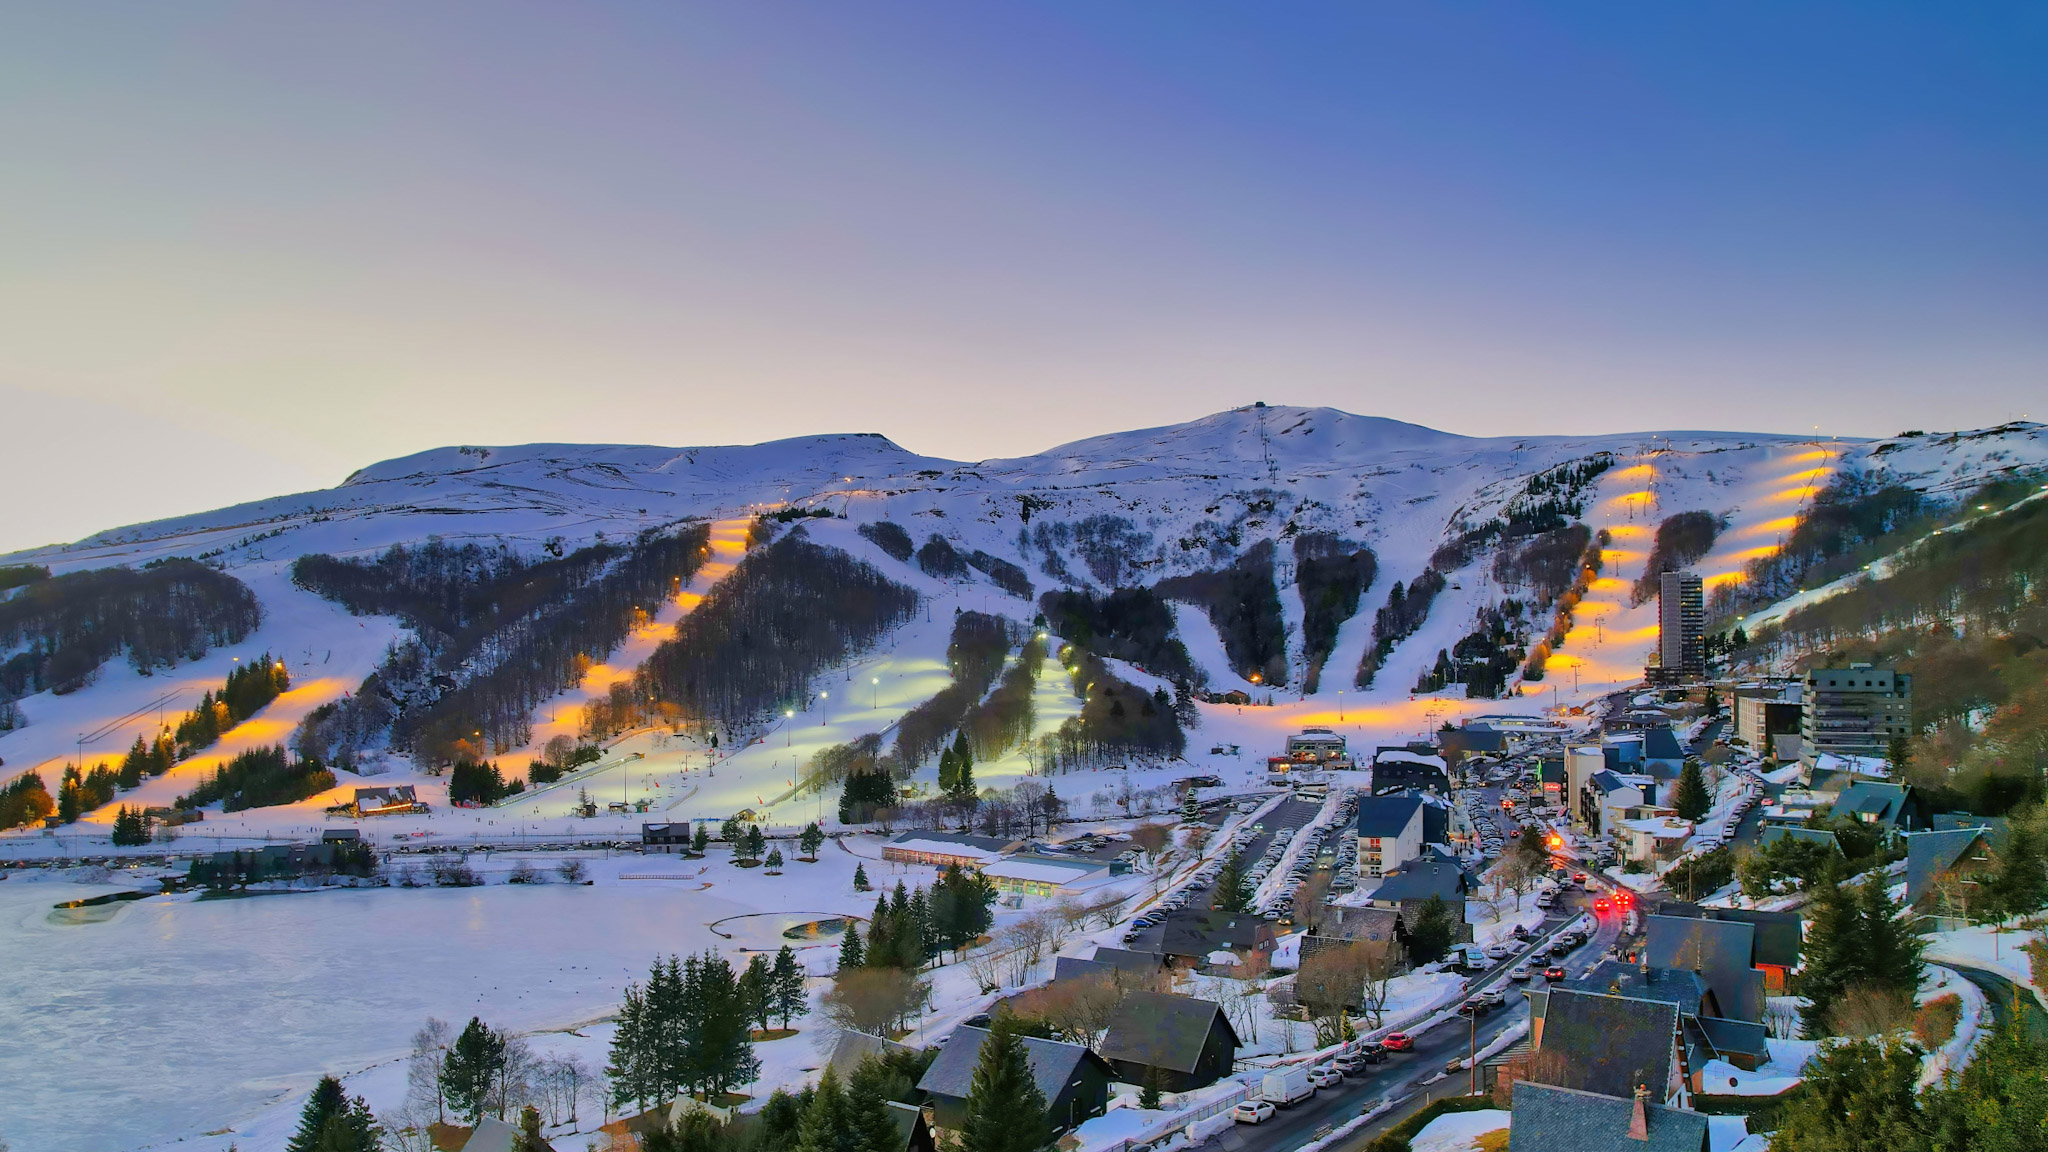 Sunset over the winter sports resort of Super Besse